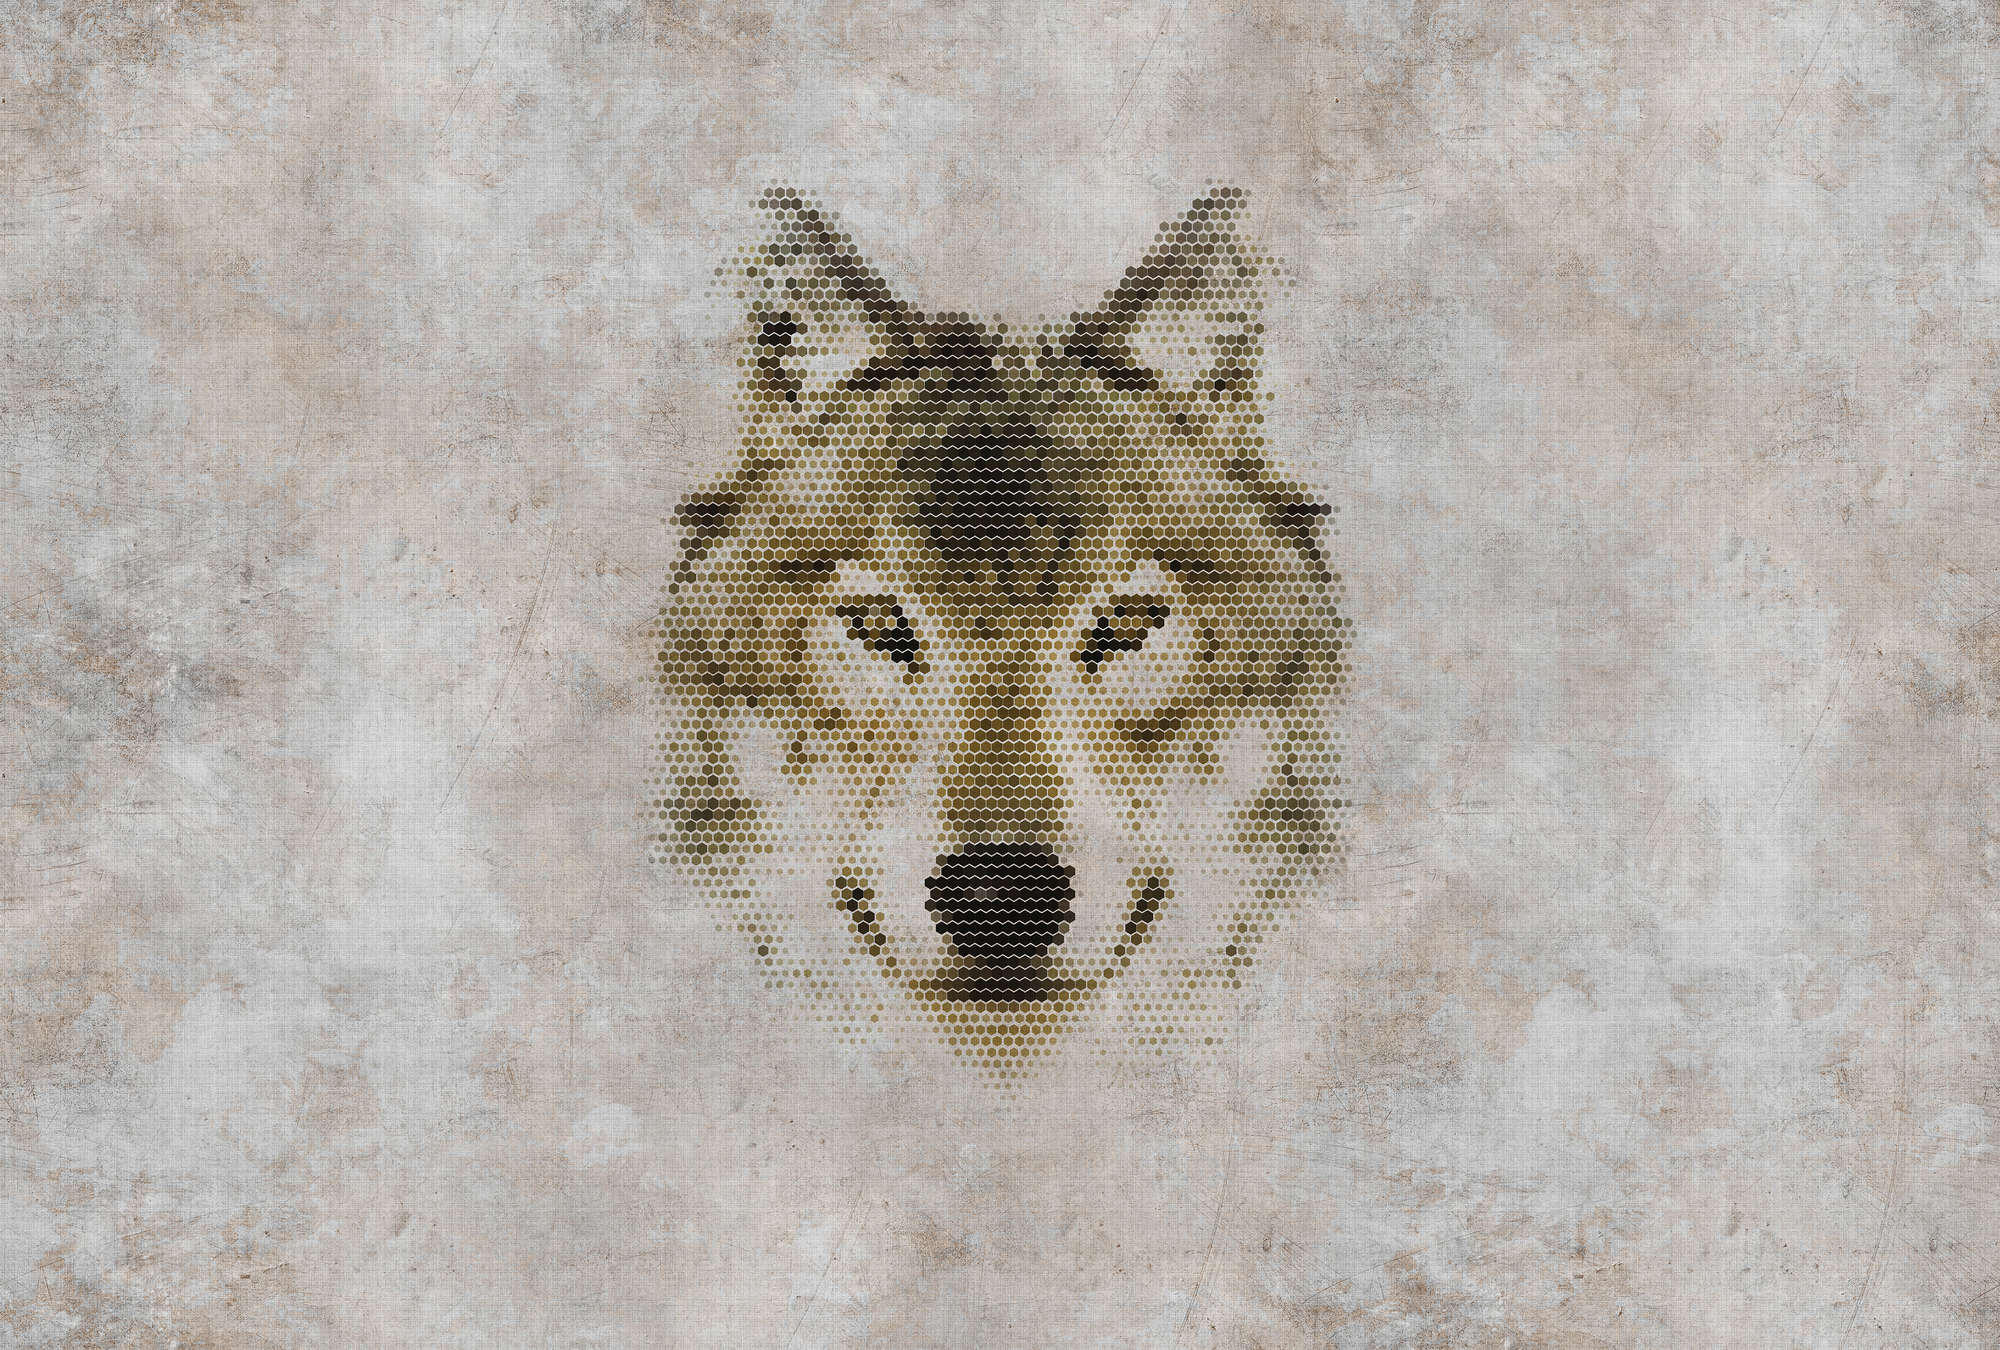             Big three 1 - digital print wallpaper in concrete look with wolf - natural linen structure - beige, brown | premium smooth non-woven
        